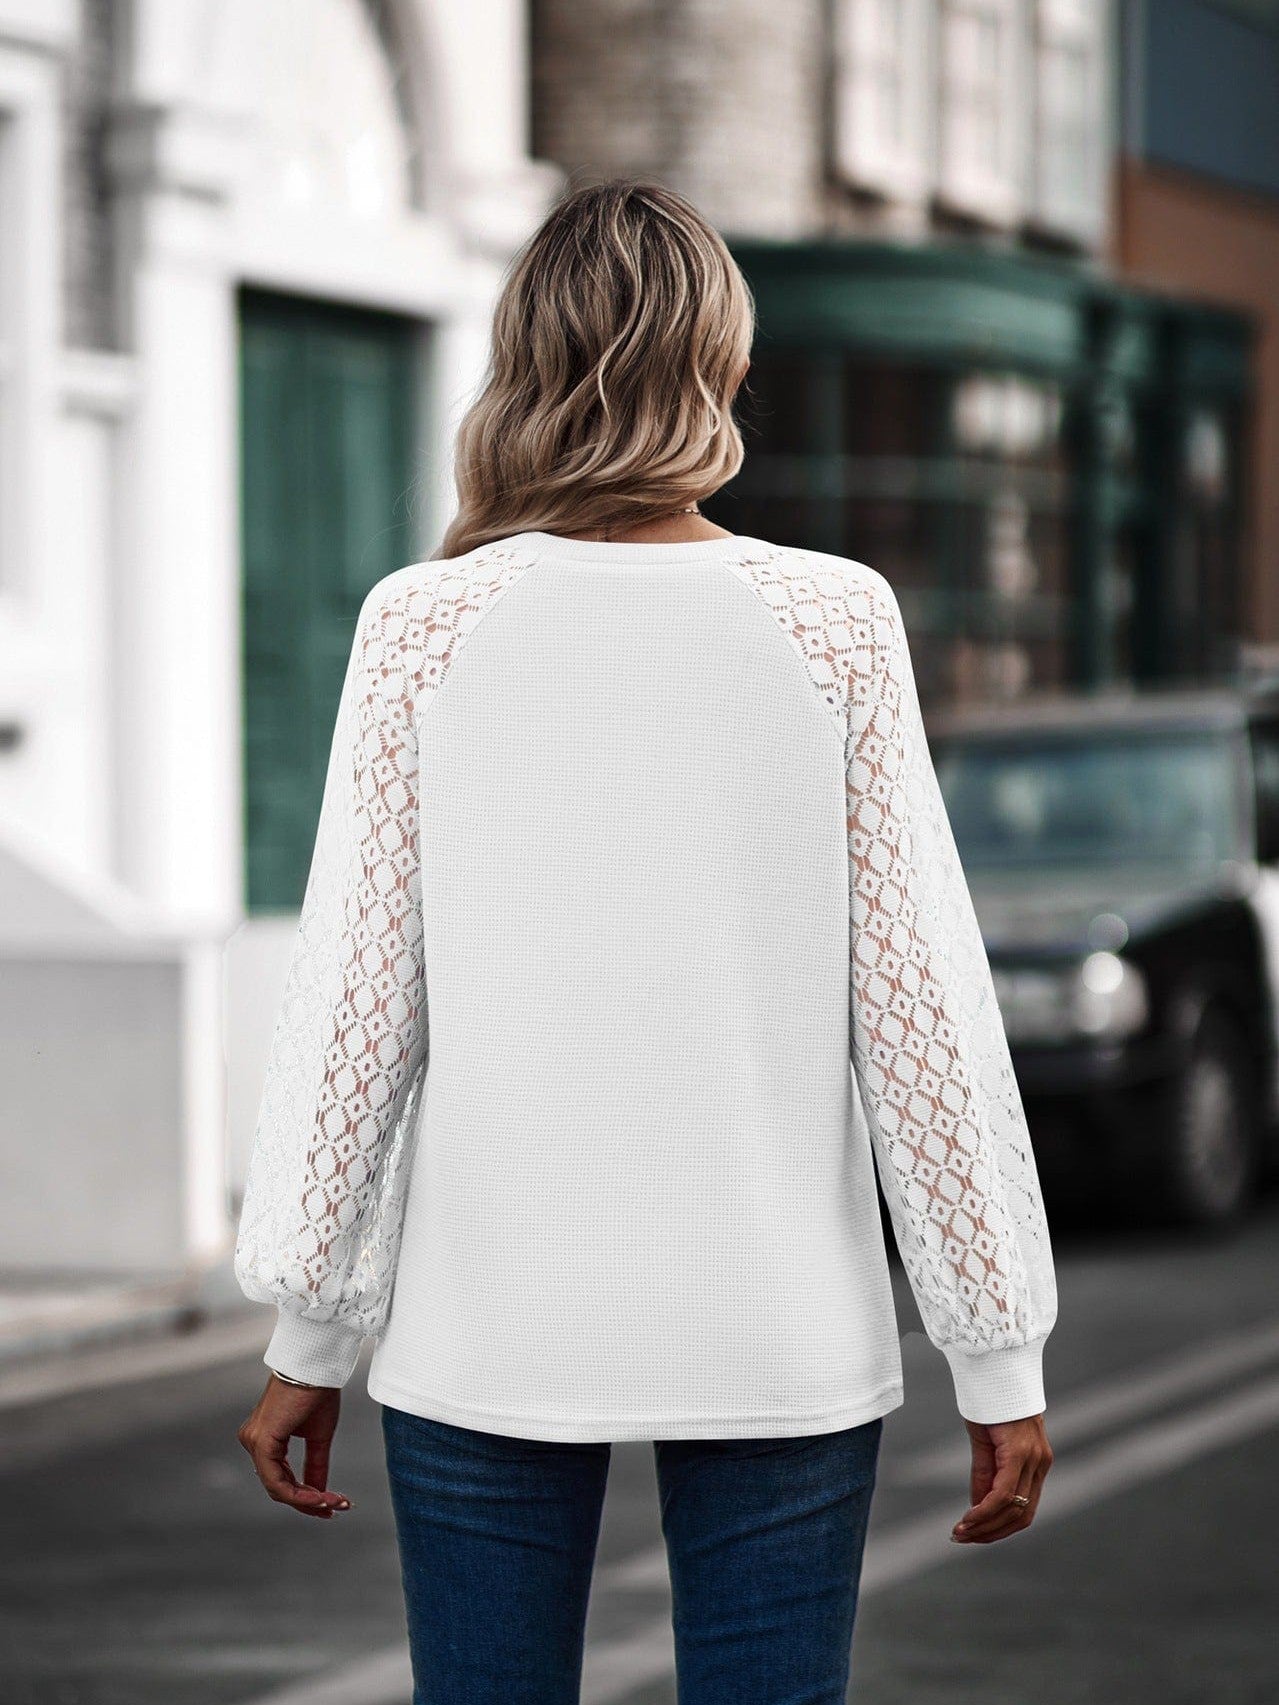 Women's lace bubble sleeve V-neck long-sleeved top